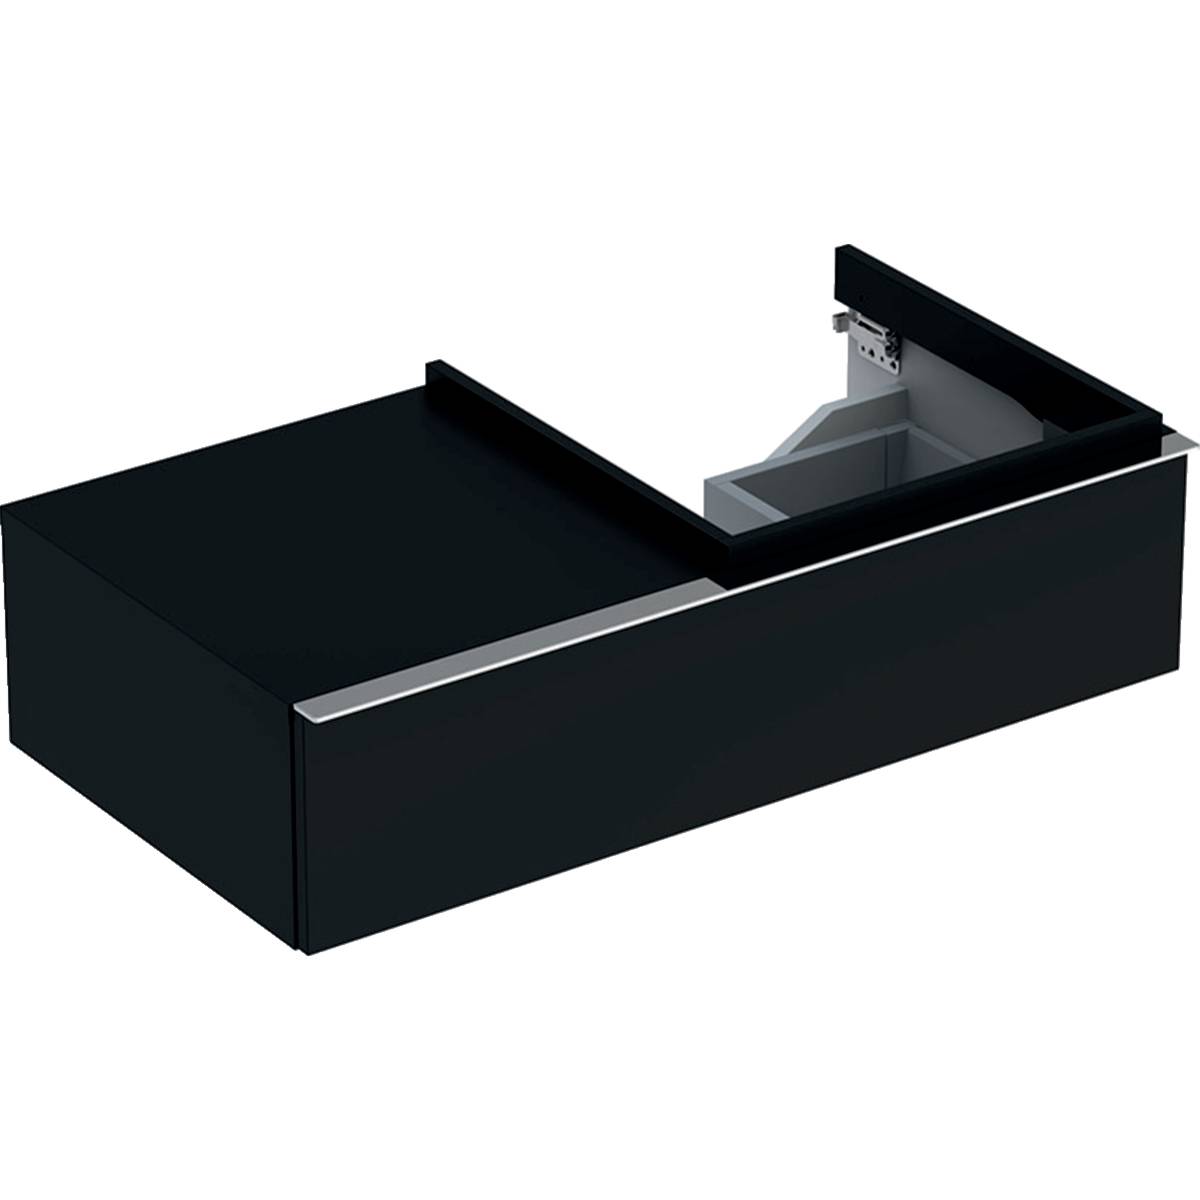 iCon cabinet for washbasin, with one drawer and shelf surface